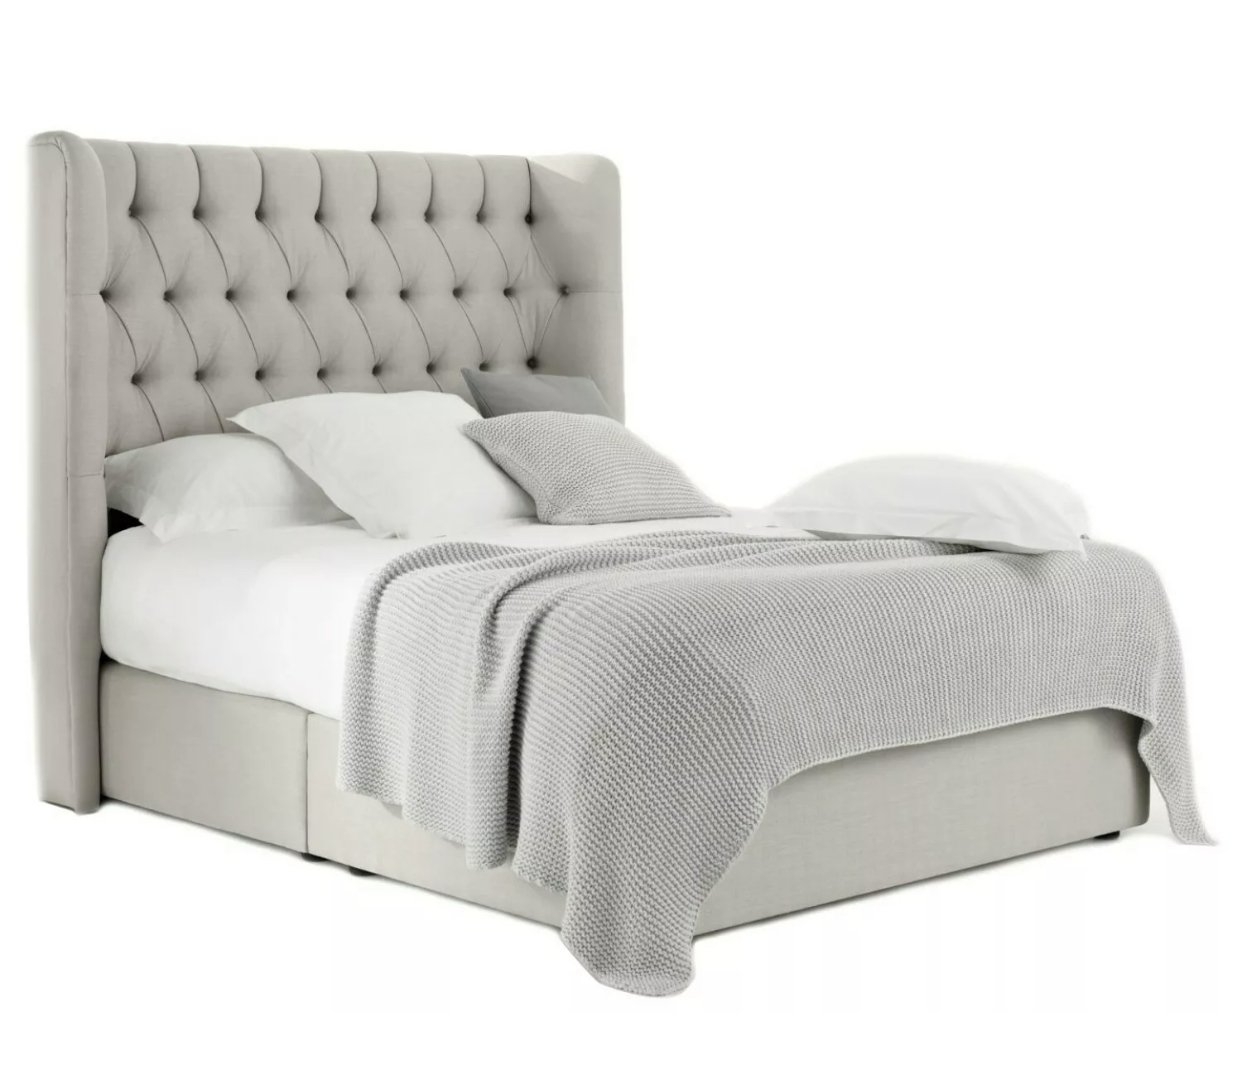 Winchester Bed Available In All Colours Sizes Vary From Double King Or Super King